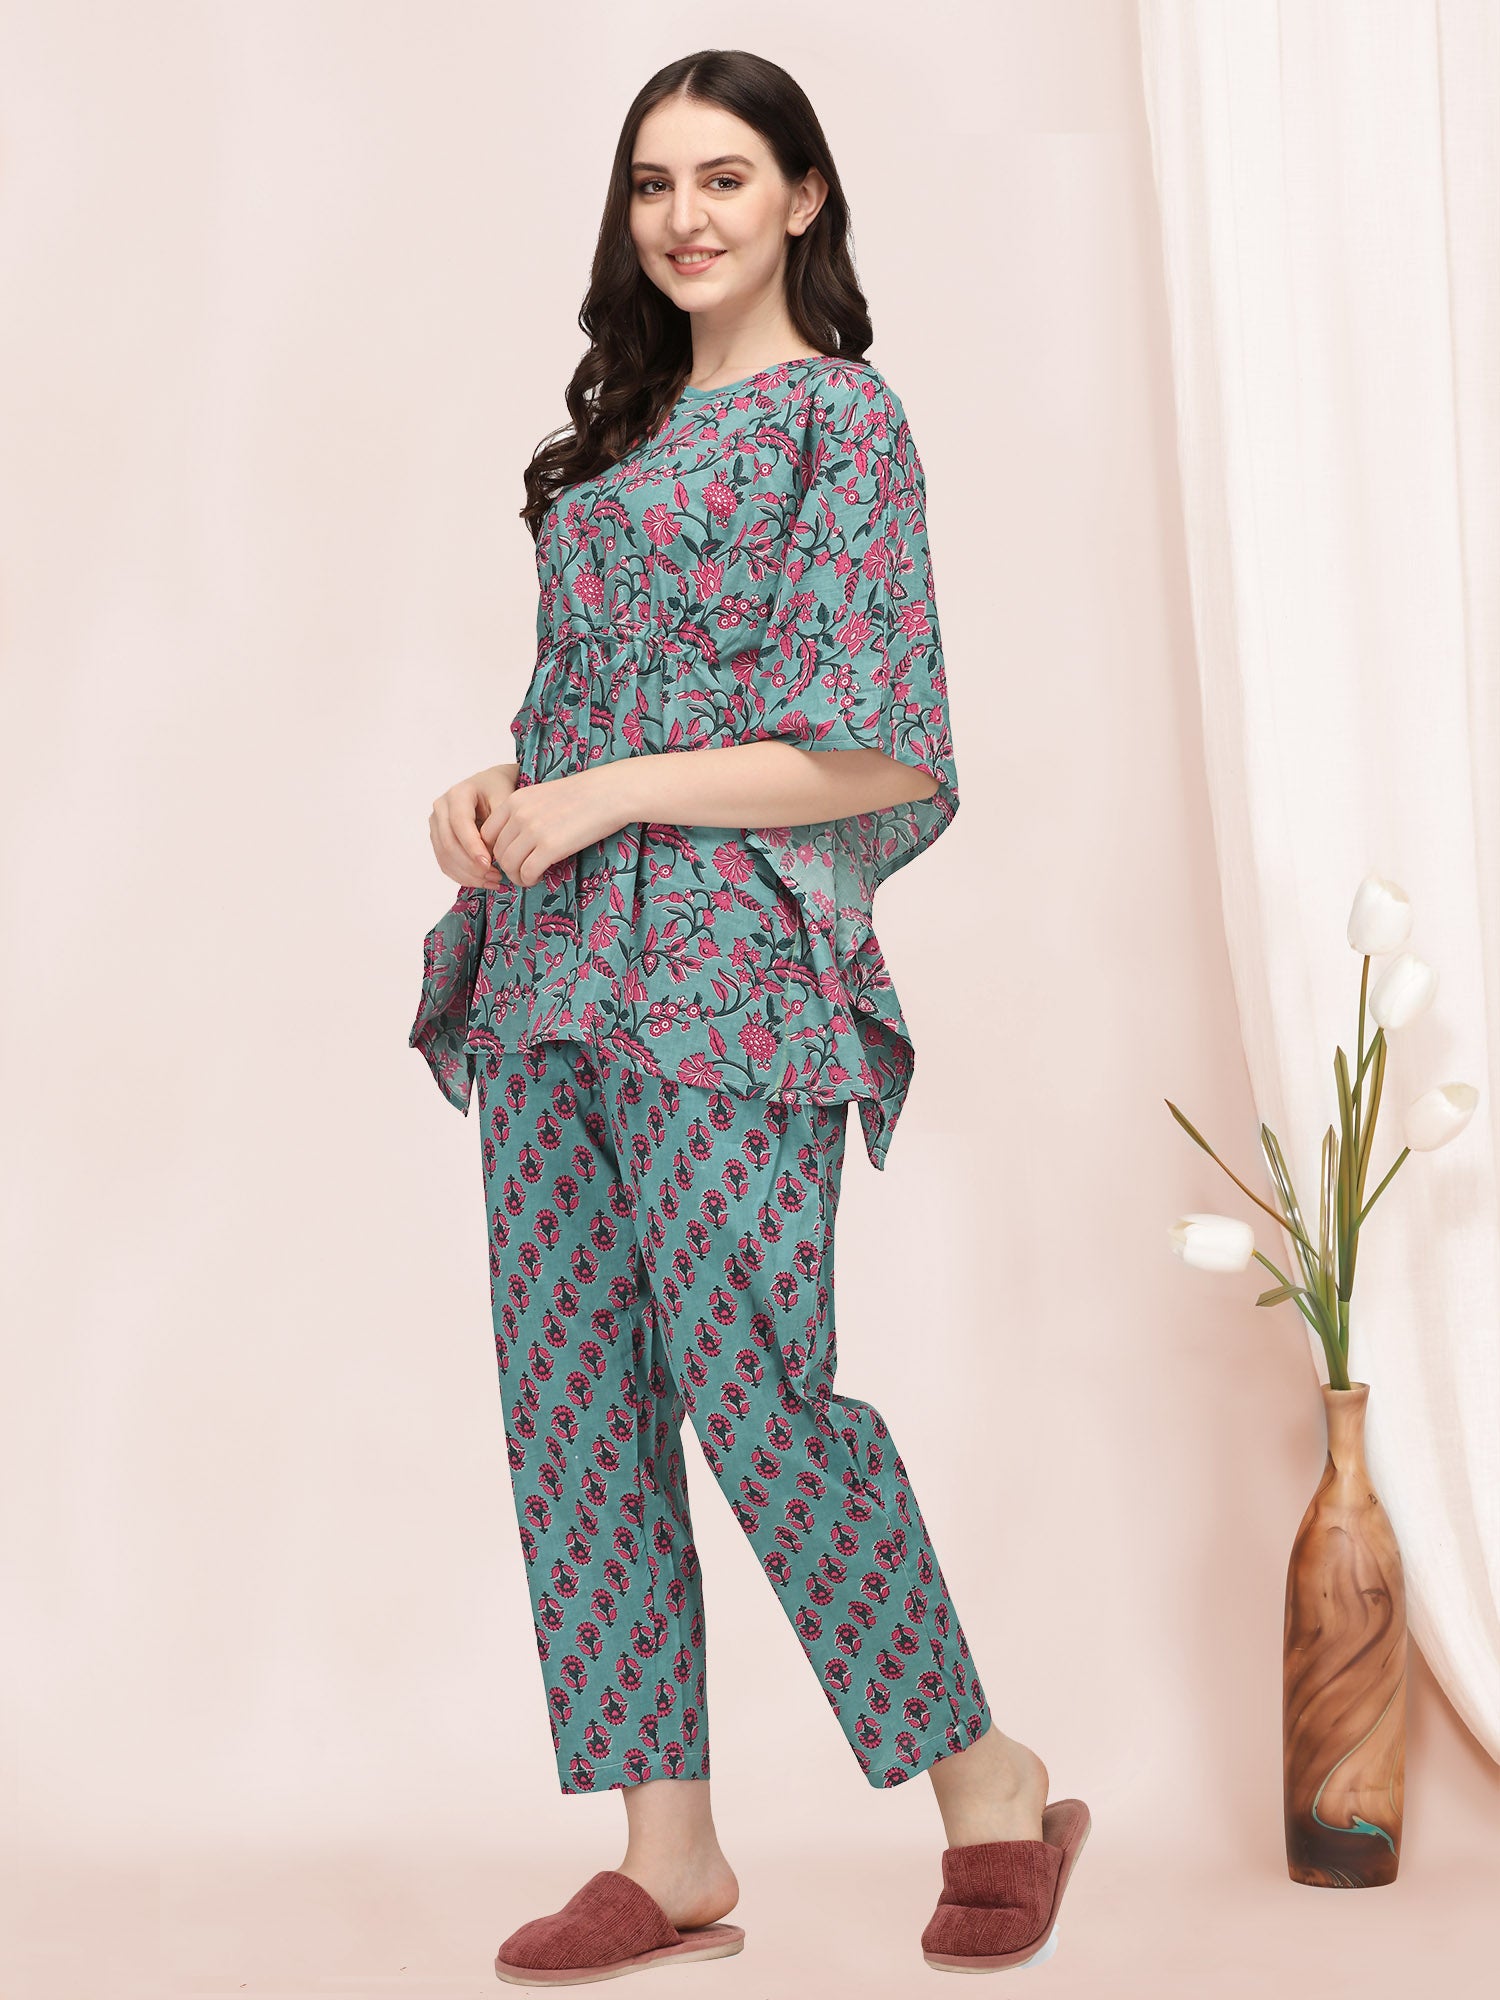 Women's Dusty blue And Pink Floral Printed Kaftan Night Suit Set  - MESMORA FASHION